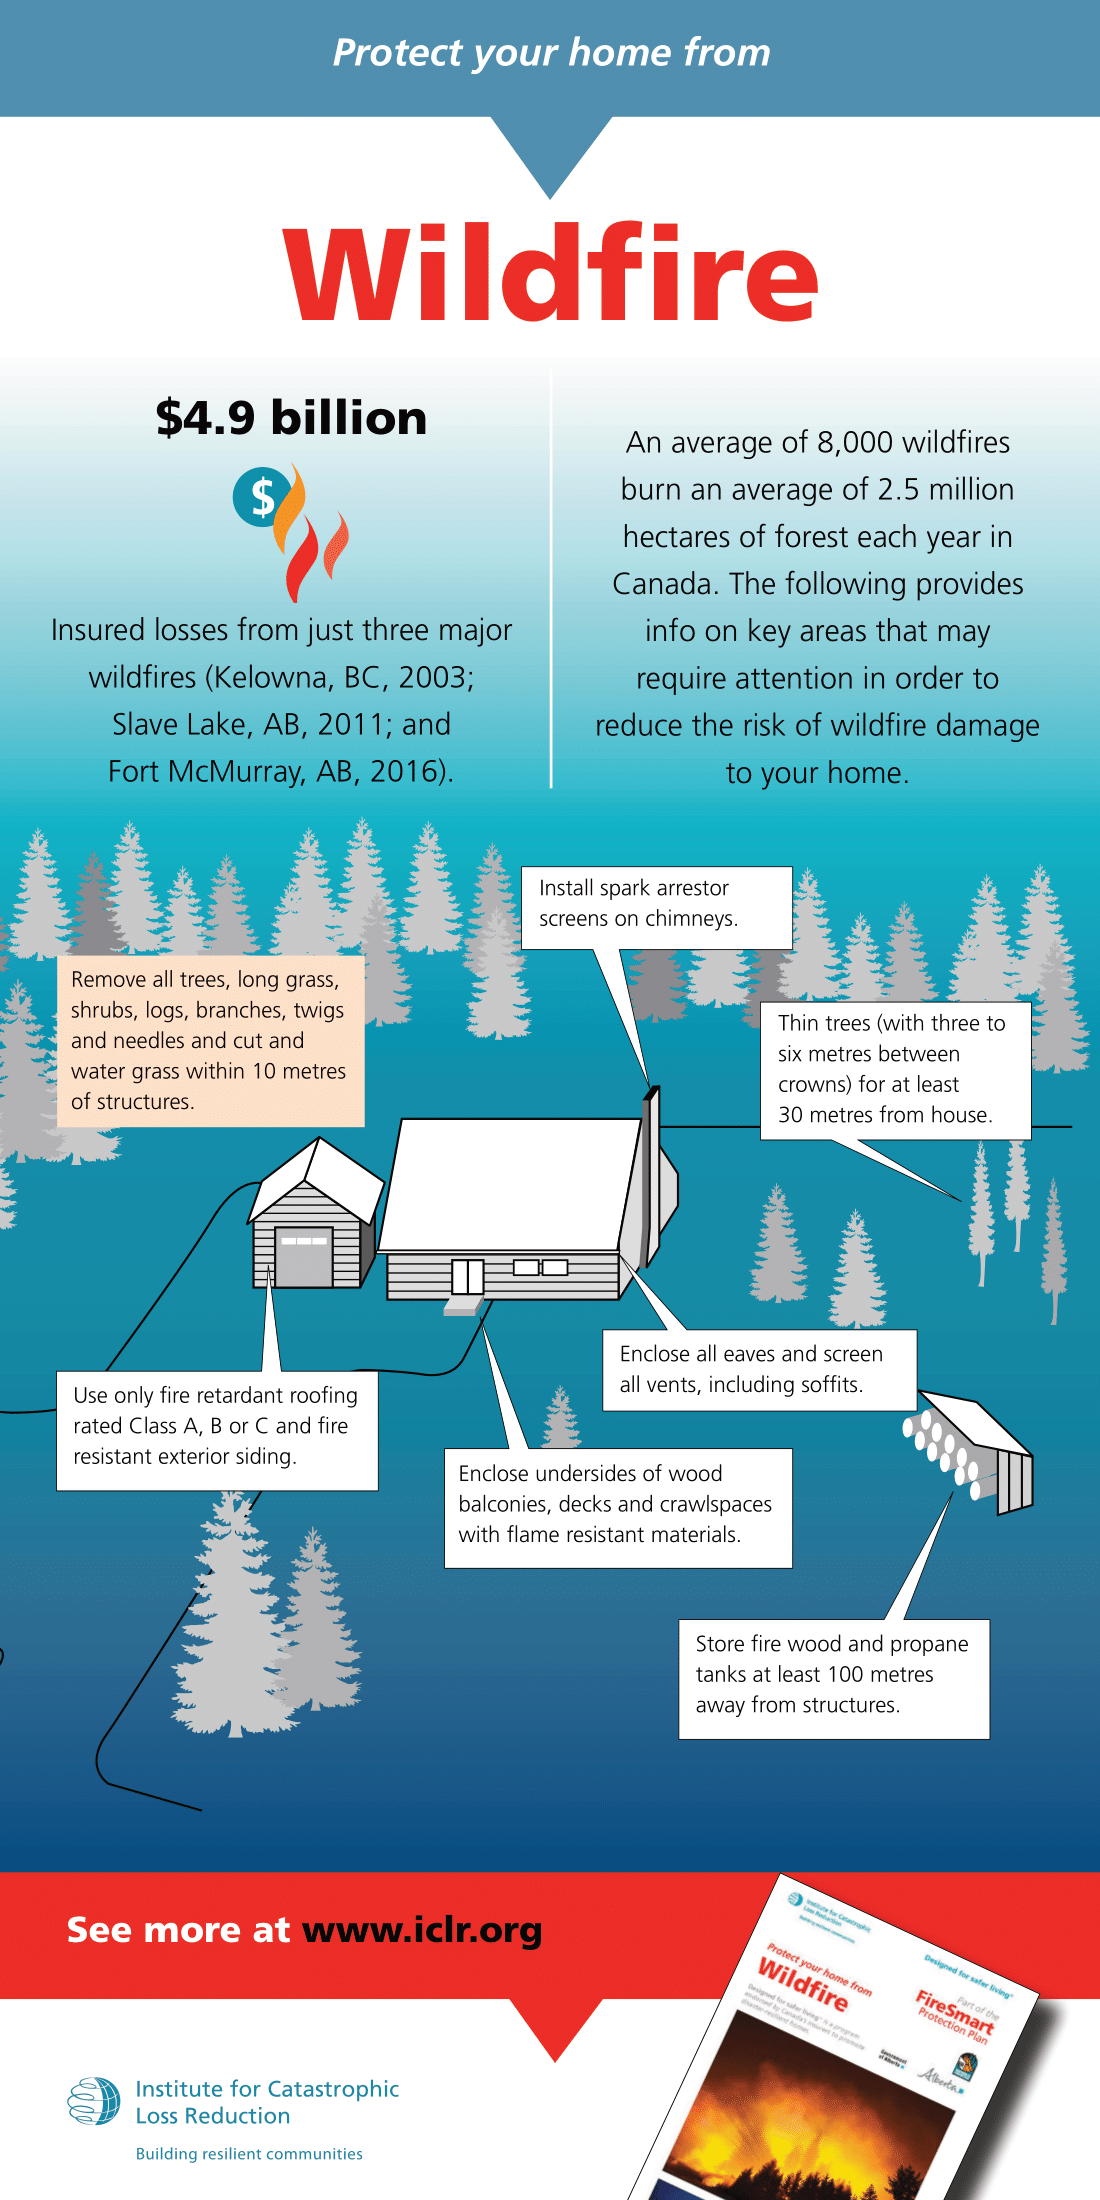 iclr-wildfire-infographic-eng.png